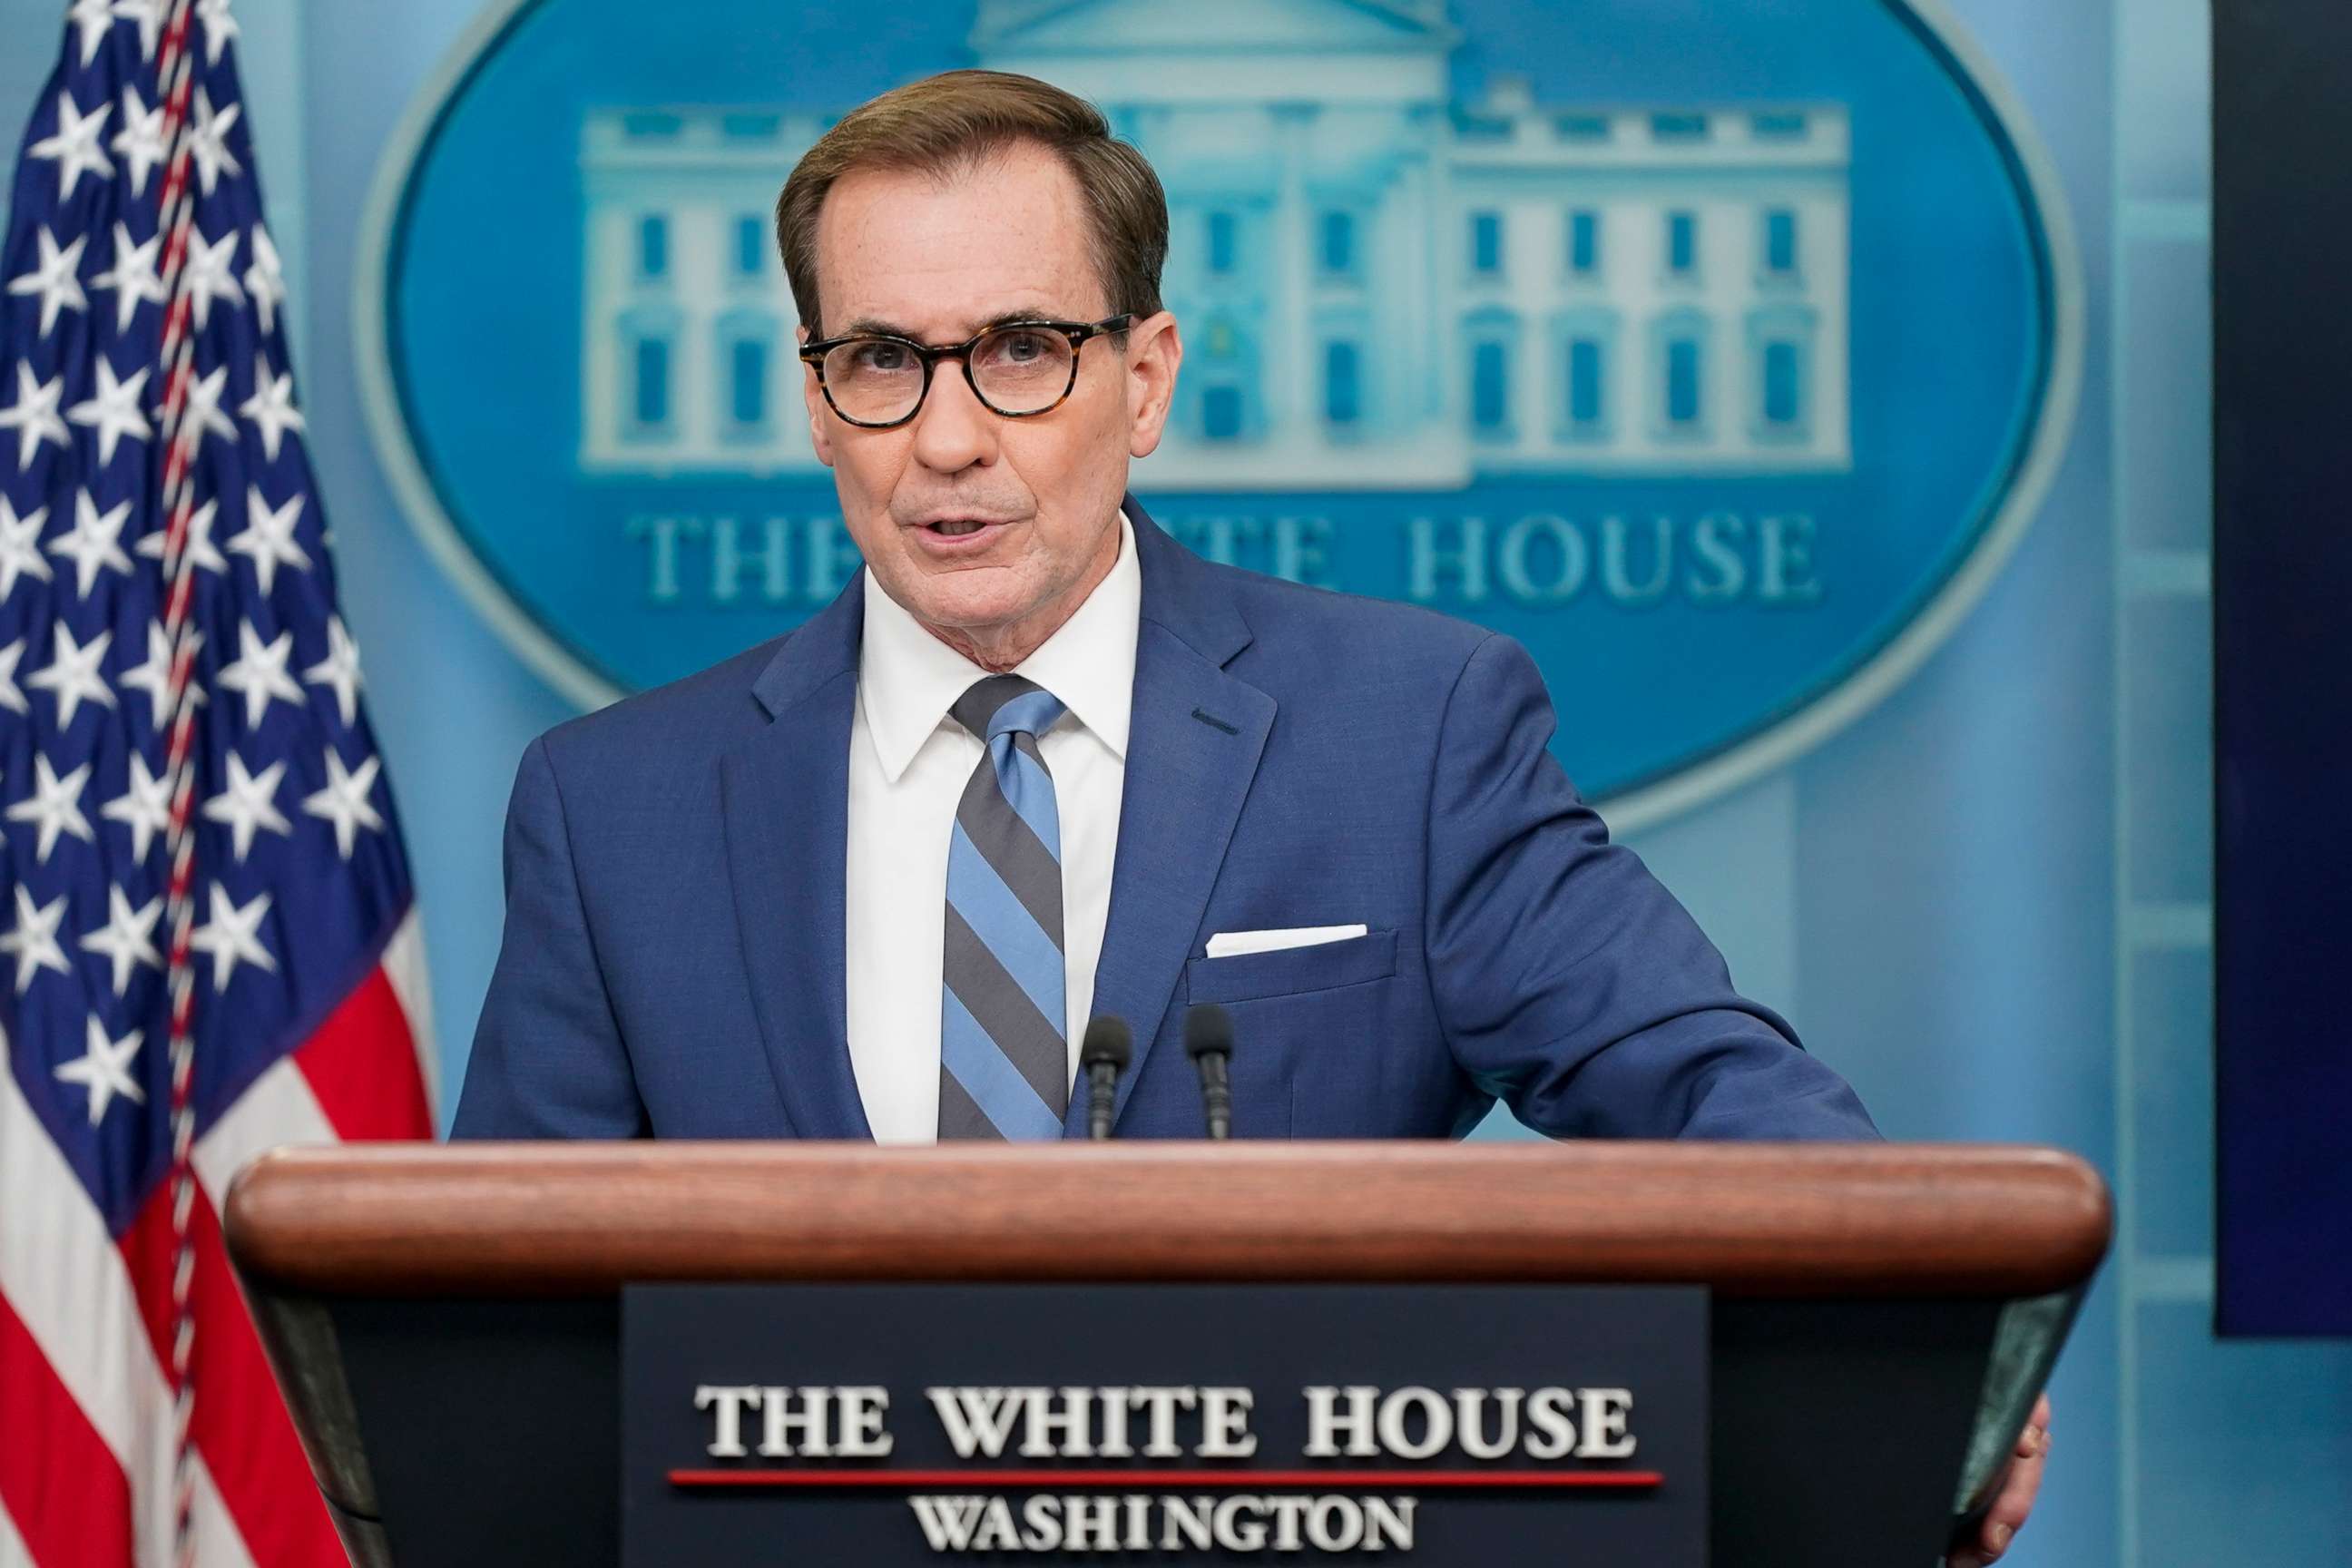 PHOTO: National Security Council spokesman John Kirby speaks during a press briefing at the White House, on Nov. 28, 2022, in Washington, D.C.